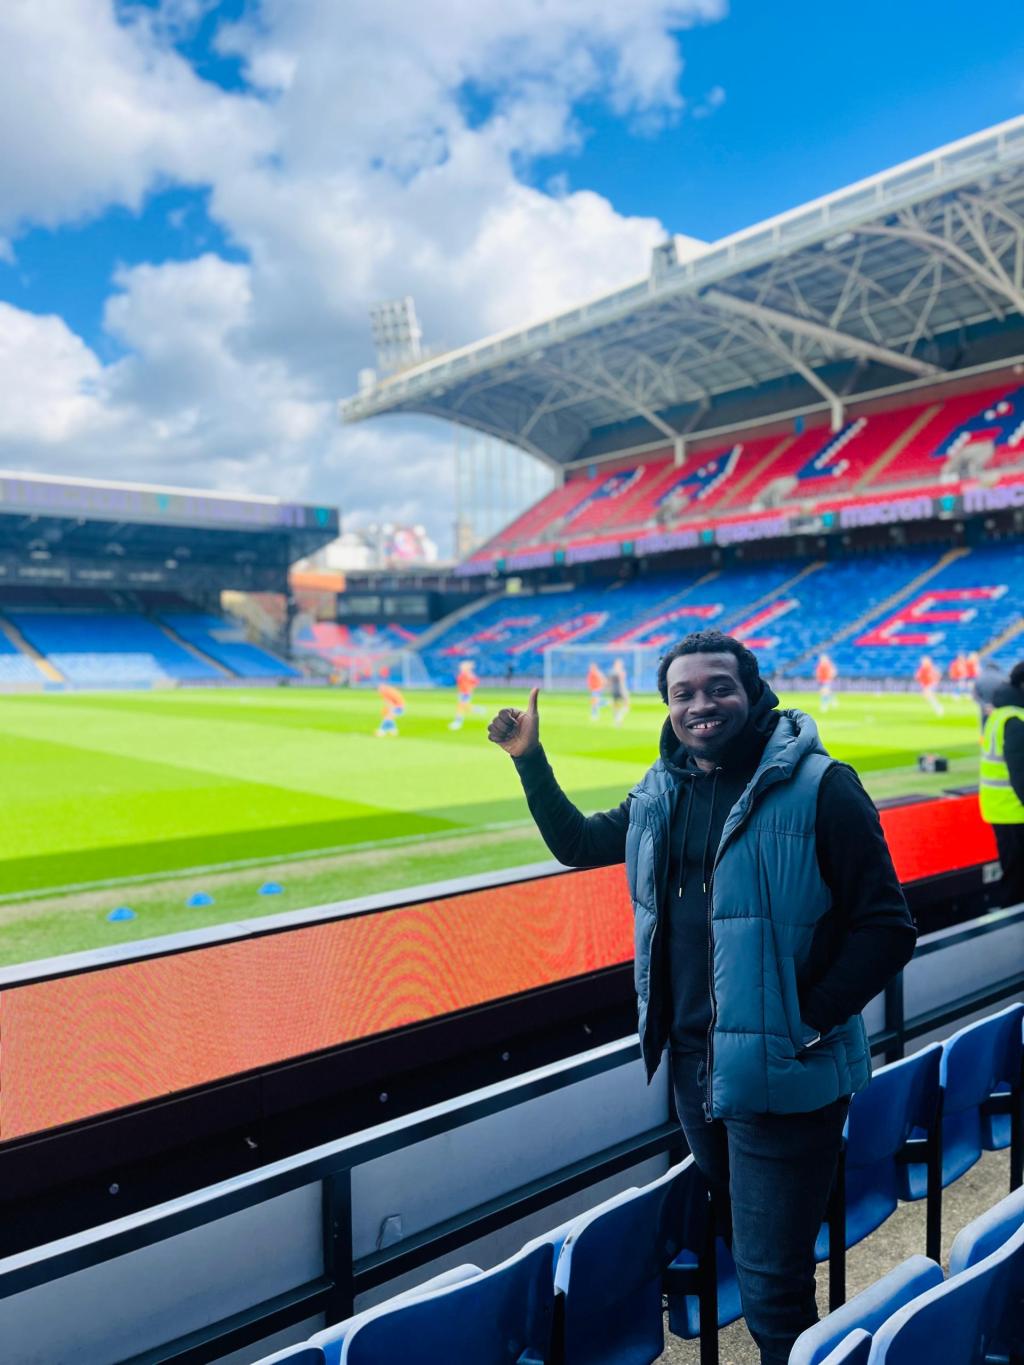 First Crystal Palace FC experience at Selhurst Park